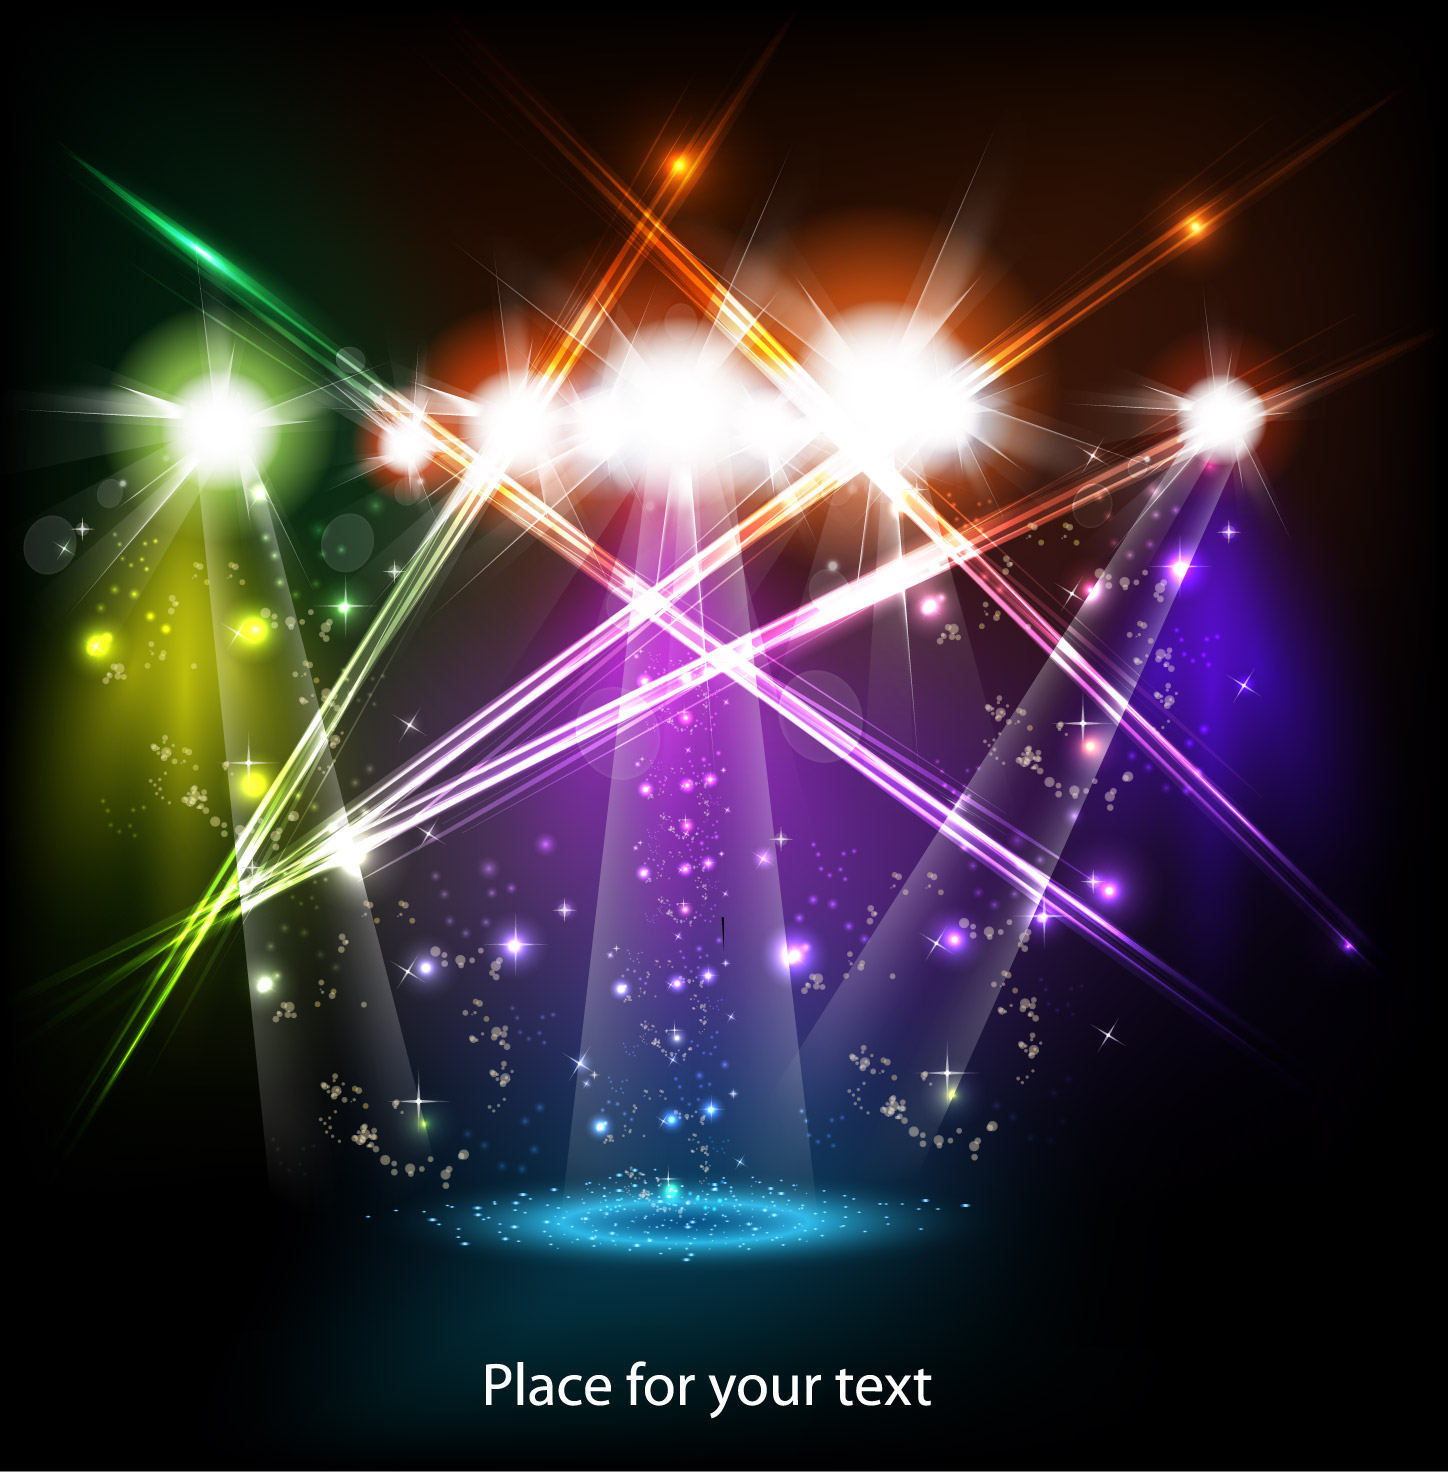 Bright stage lighting effects 01 vector Free Vector / 4Vector